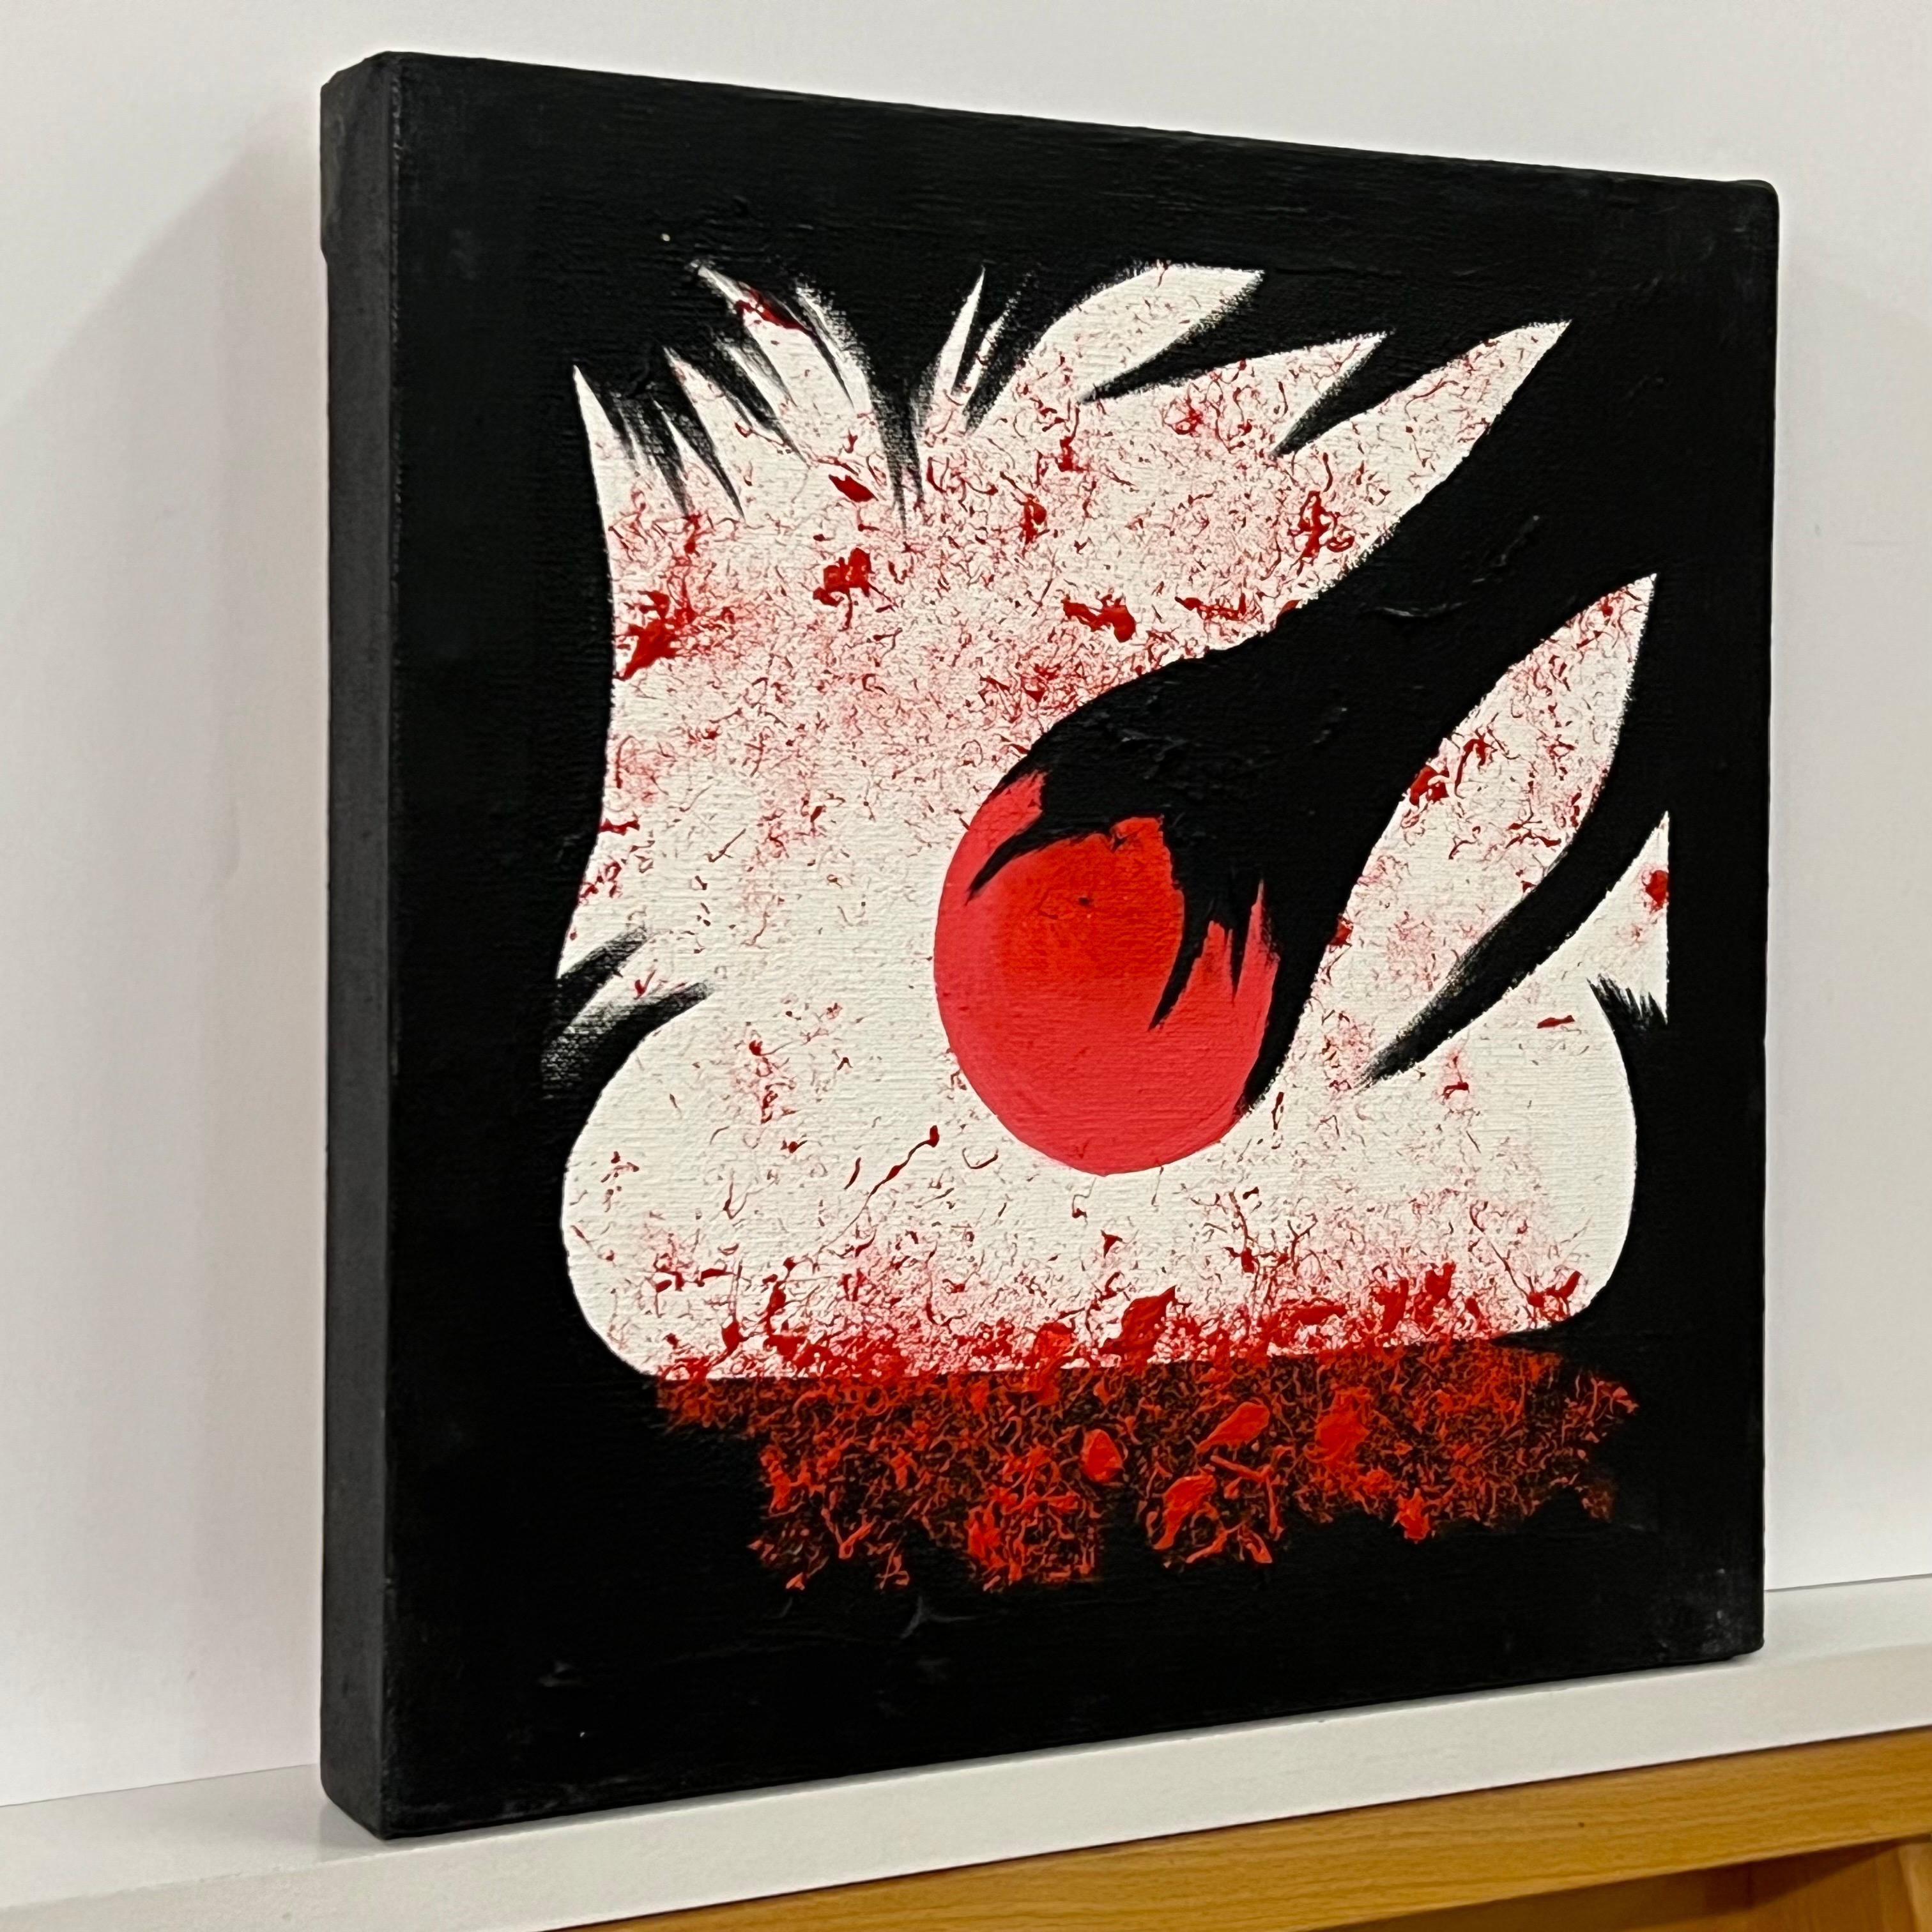 Red Black & White Painting on Canvas by Contemporary British Artist 

Art measures 12 x 12 inches 
Original, Acrylic on Canvas 
Signed & dated on the rear 

Fil Earthstomp is an enigmatic artist and musician from deep in the subculture of England.